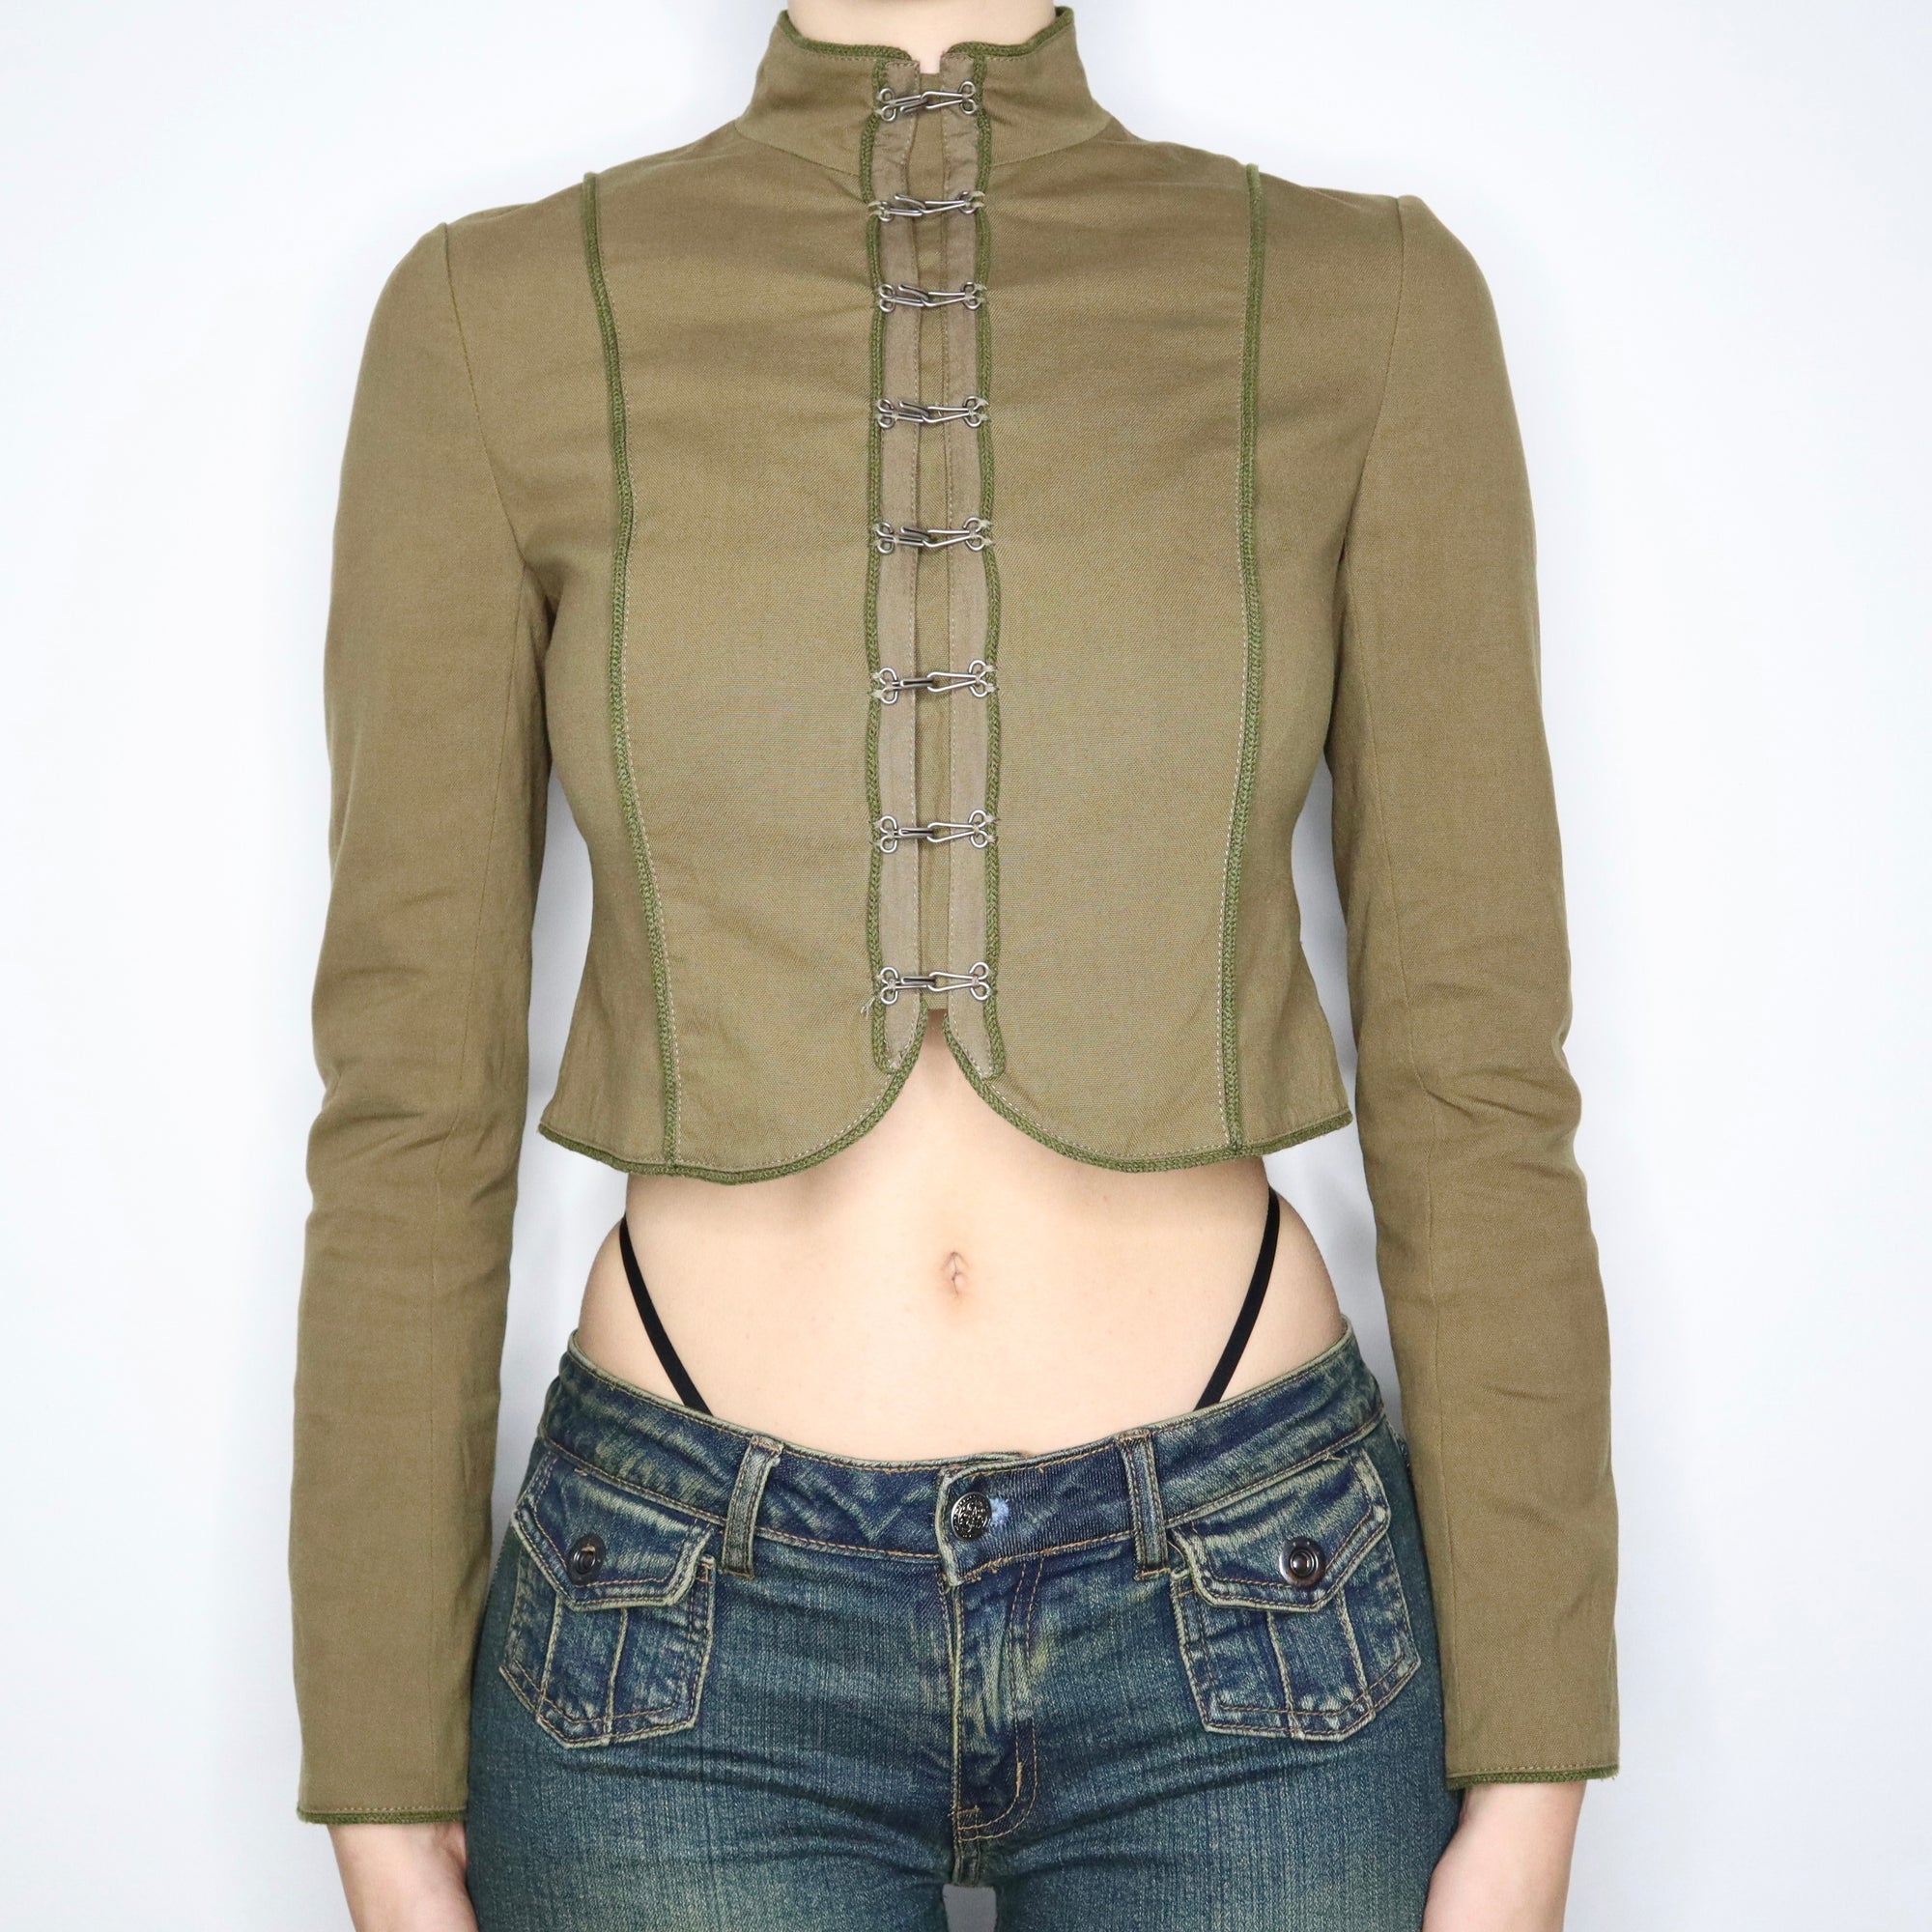 Vintage Early 2000s Olive Green Cropped Jacket